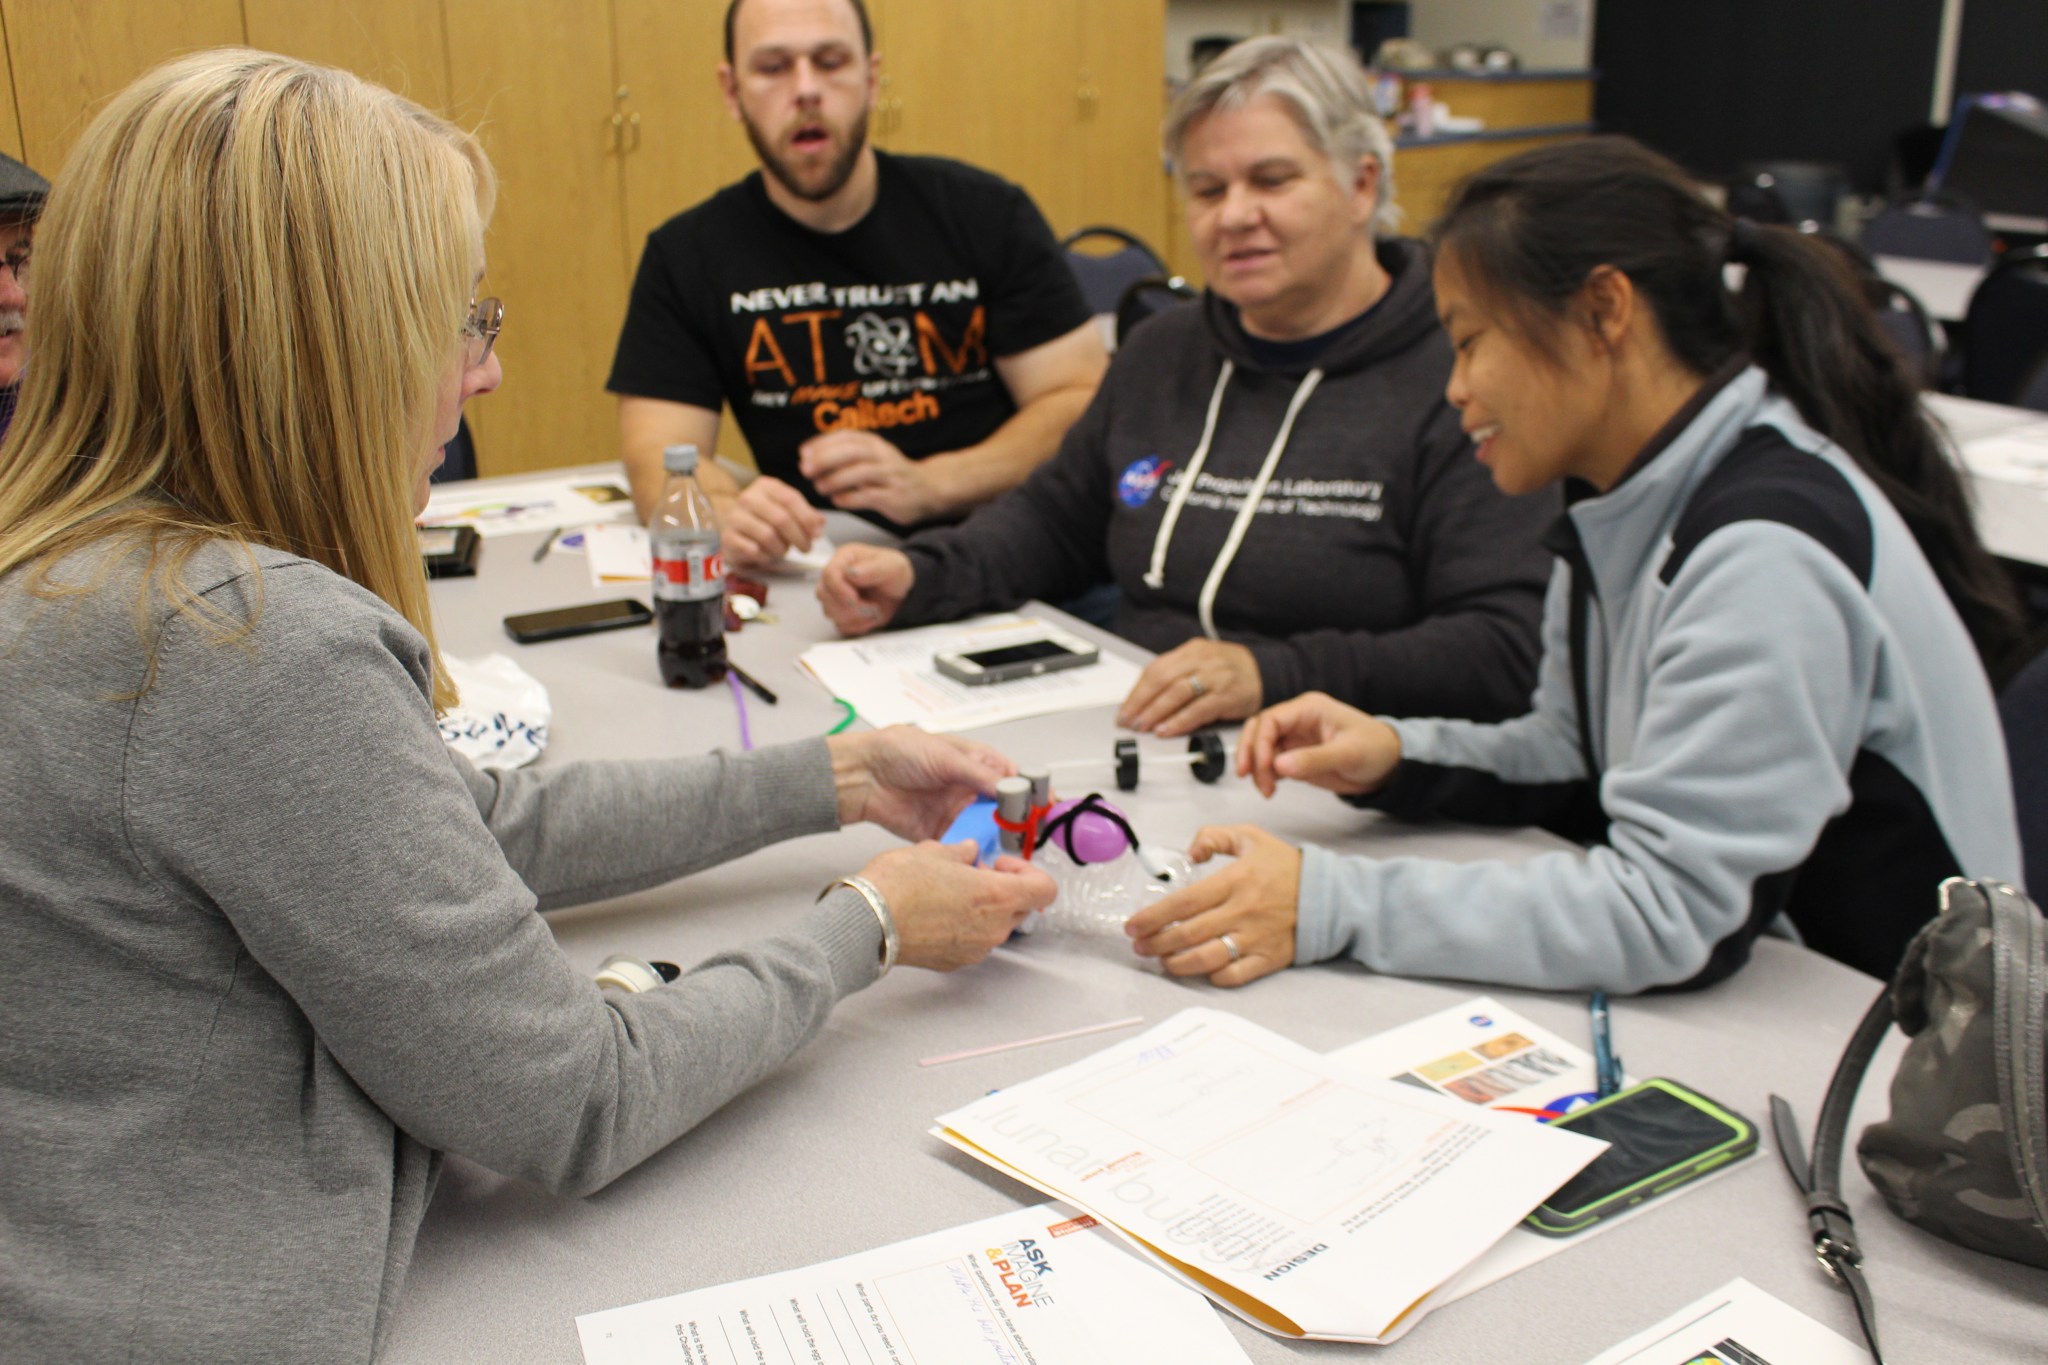 A group of educators participated in a workshop to learn how to use the Engineering Design Process to create, build and test a l